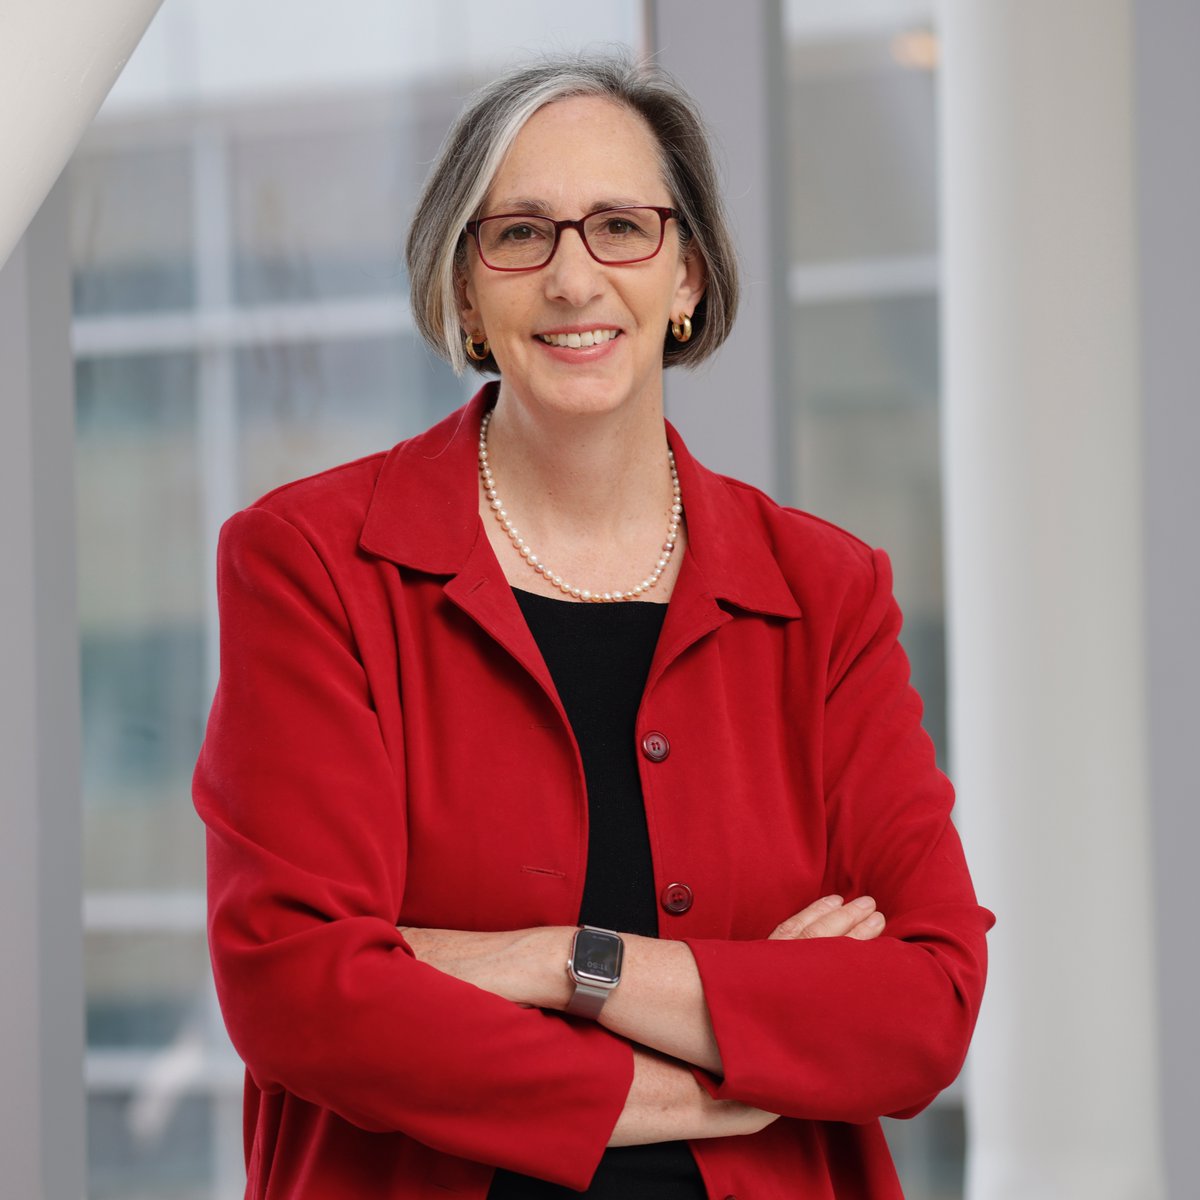 Couldn't be more proud of our fearless Chair, Dr. @KimrynRathmell, who has been appointed Director of the National Cancer Institute! We wish you all the best in your new role as @NCIDirector! Read the official press release from the @WhiteHouse here: bit.ly/46mI73s